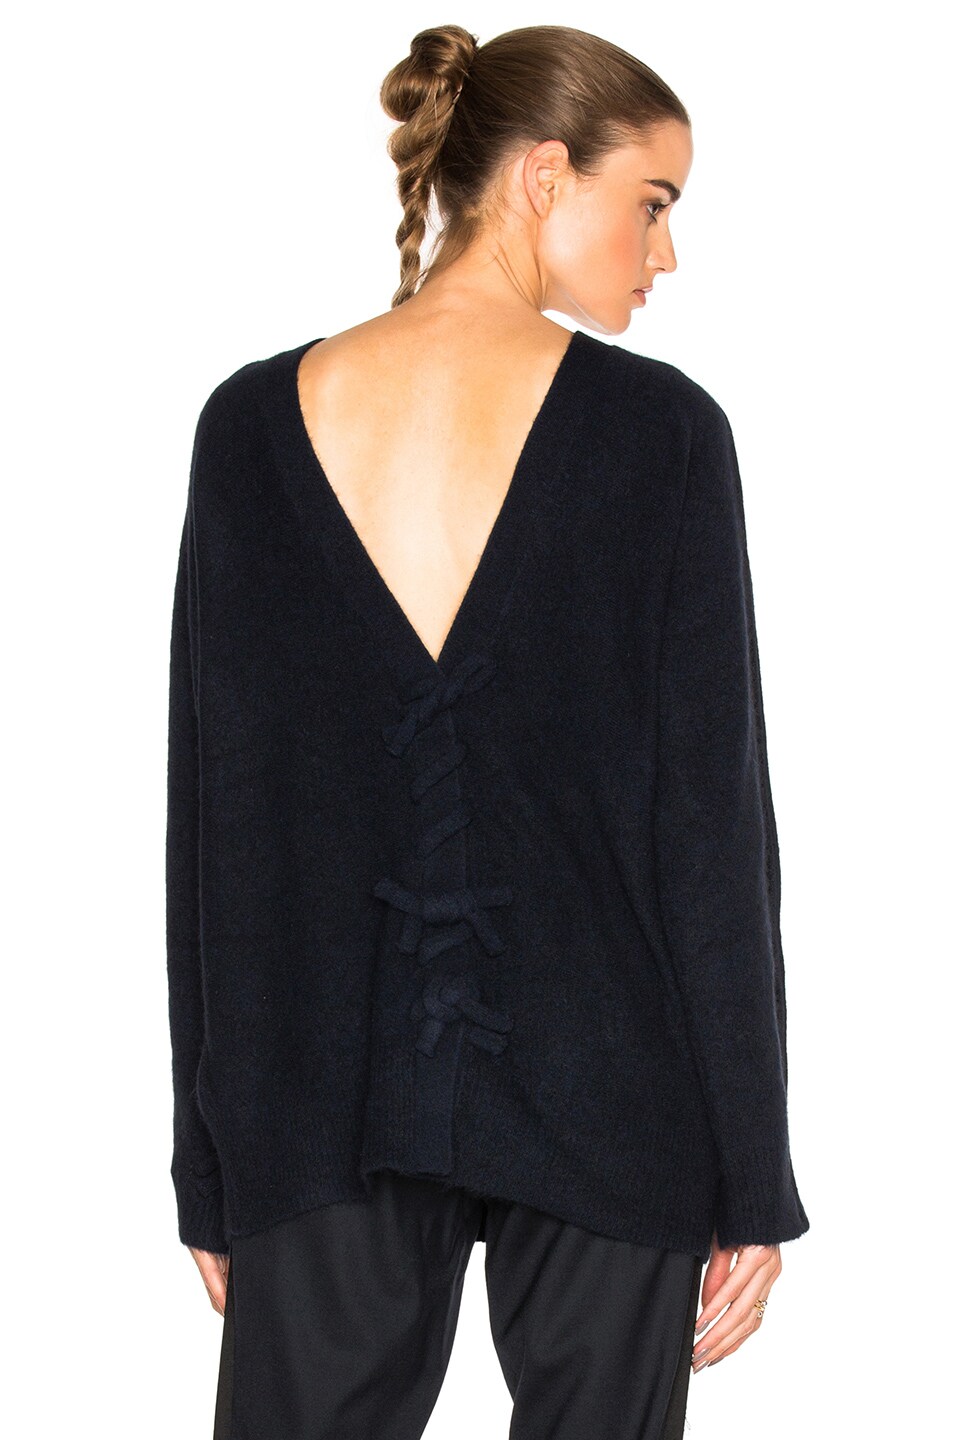 Image 1 of 3.1 phillip lim Knot Back Sweater in Dark Navy